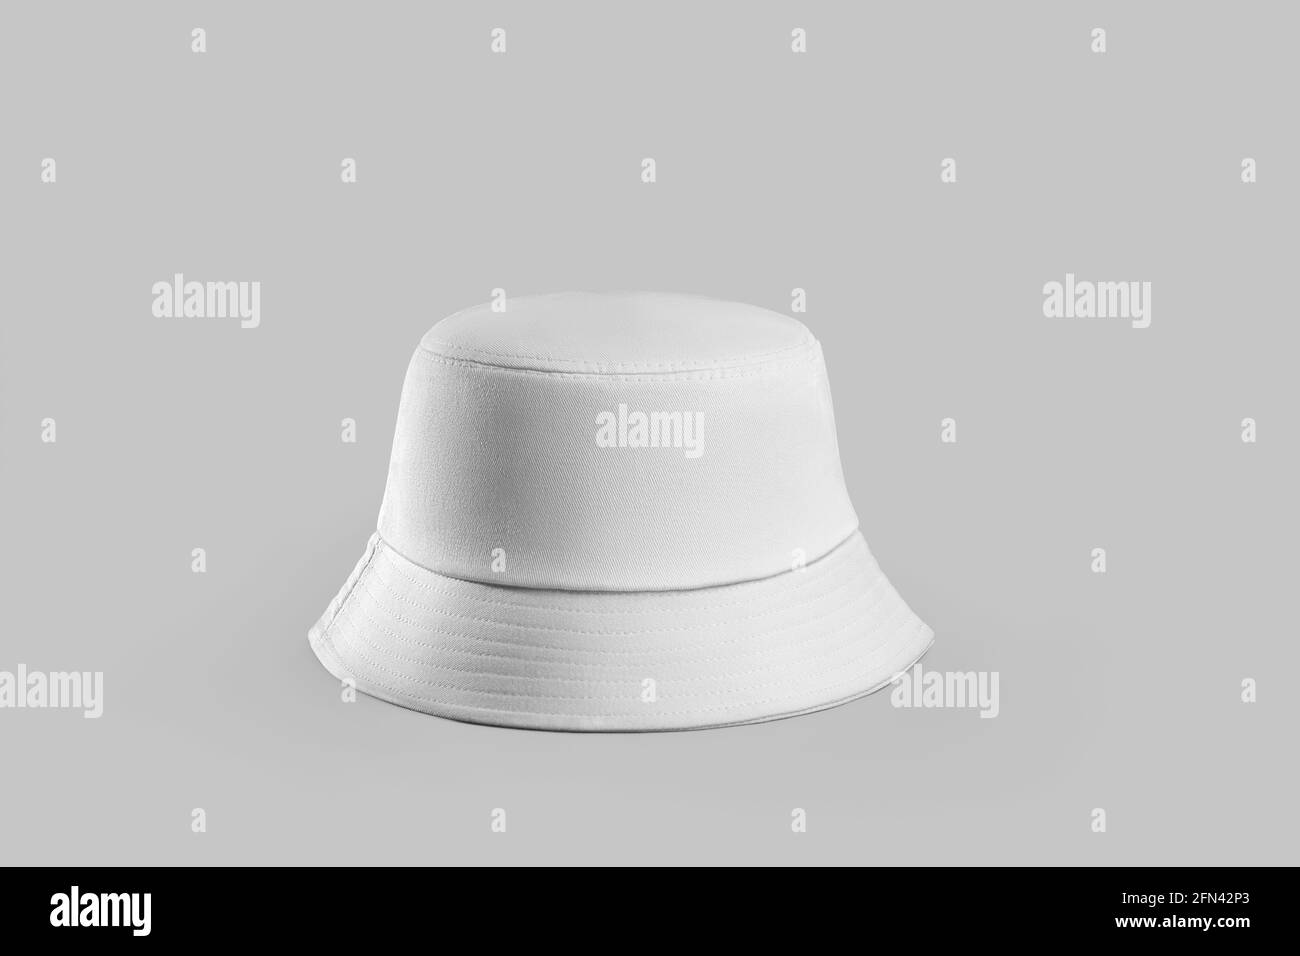 Mockup of white textured panama for sun protection, hat isolated on background. Stylish headwear template for lifestyle. Women's, men's cap with a pla Stock Photo